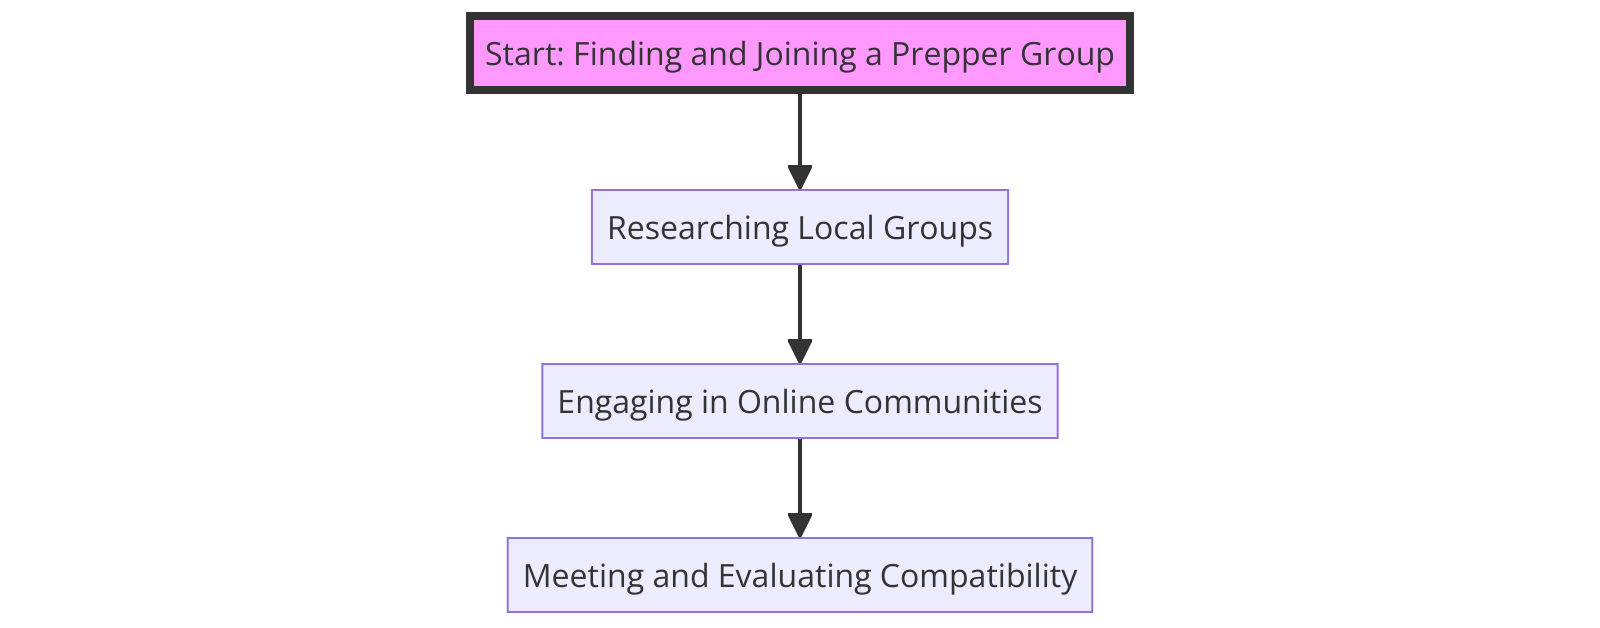 the steps to find and join a prepper group, starting from researching local groups to meeting and evaluating compatibility